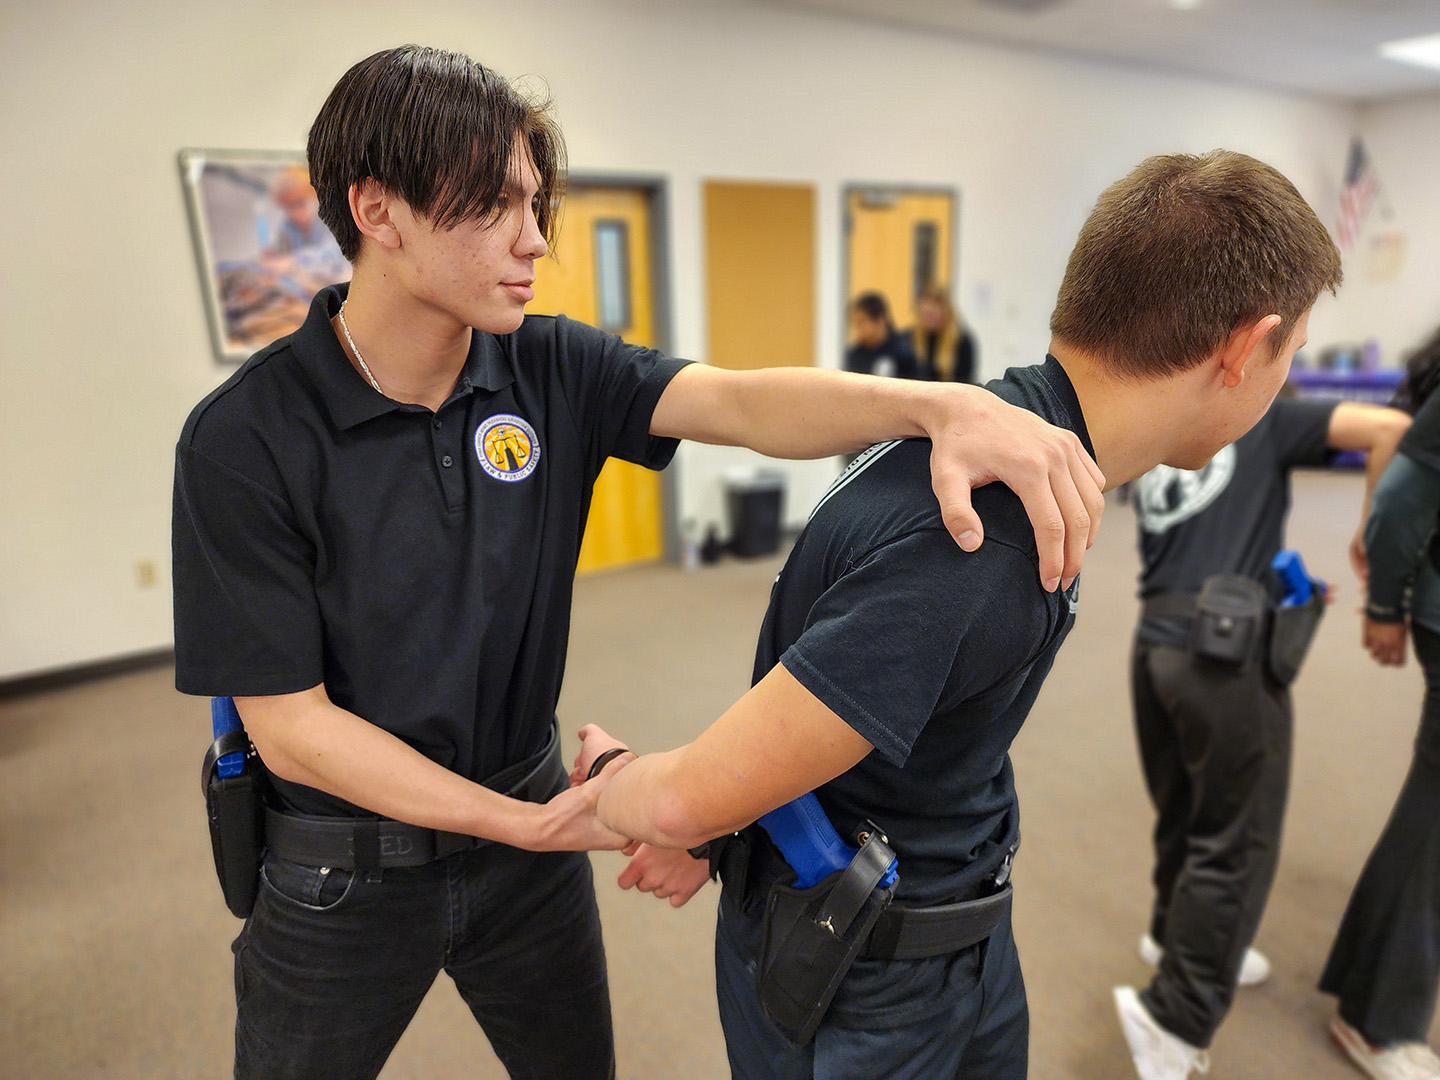 Student handcuffing another student